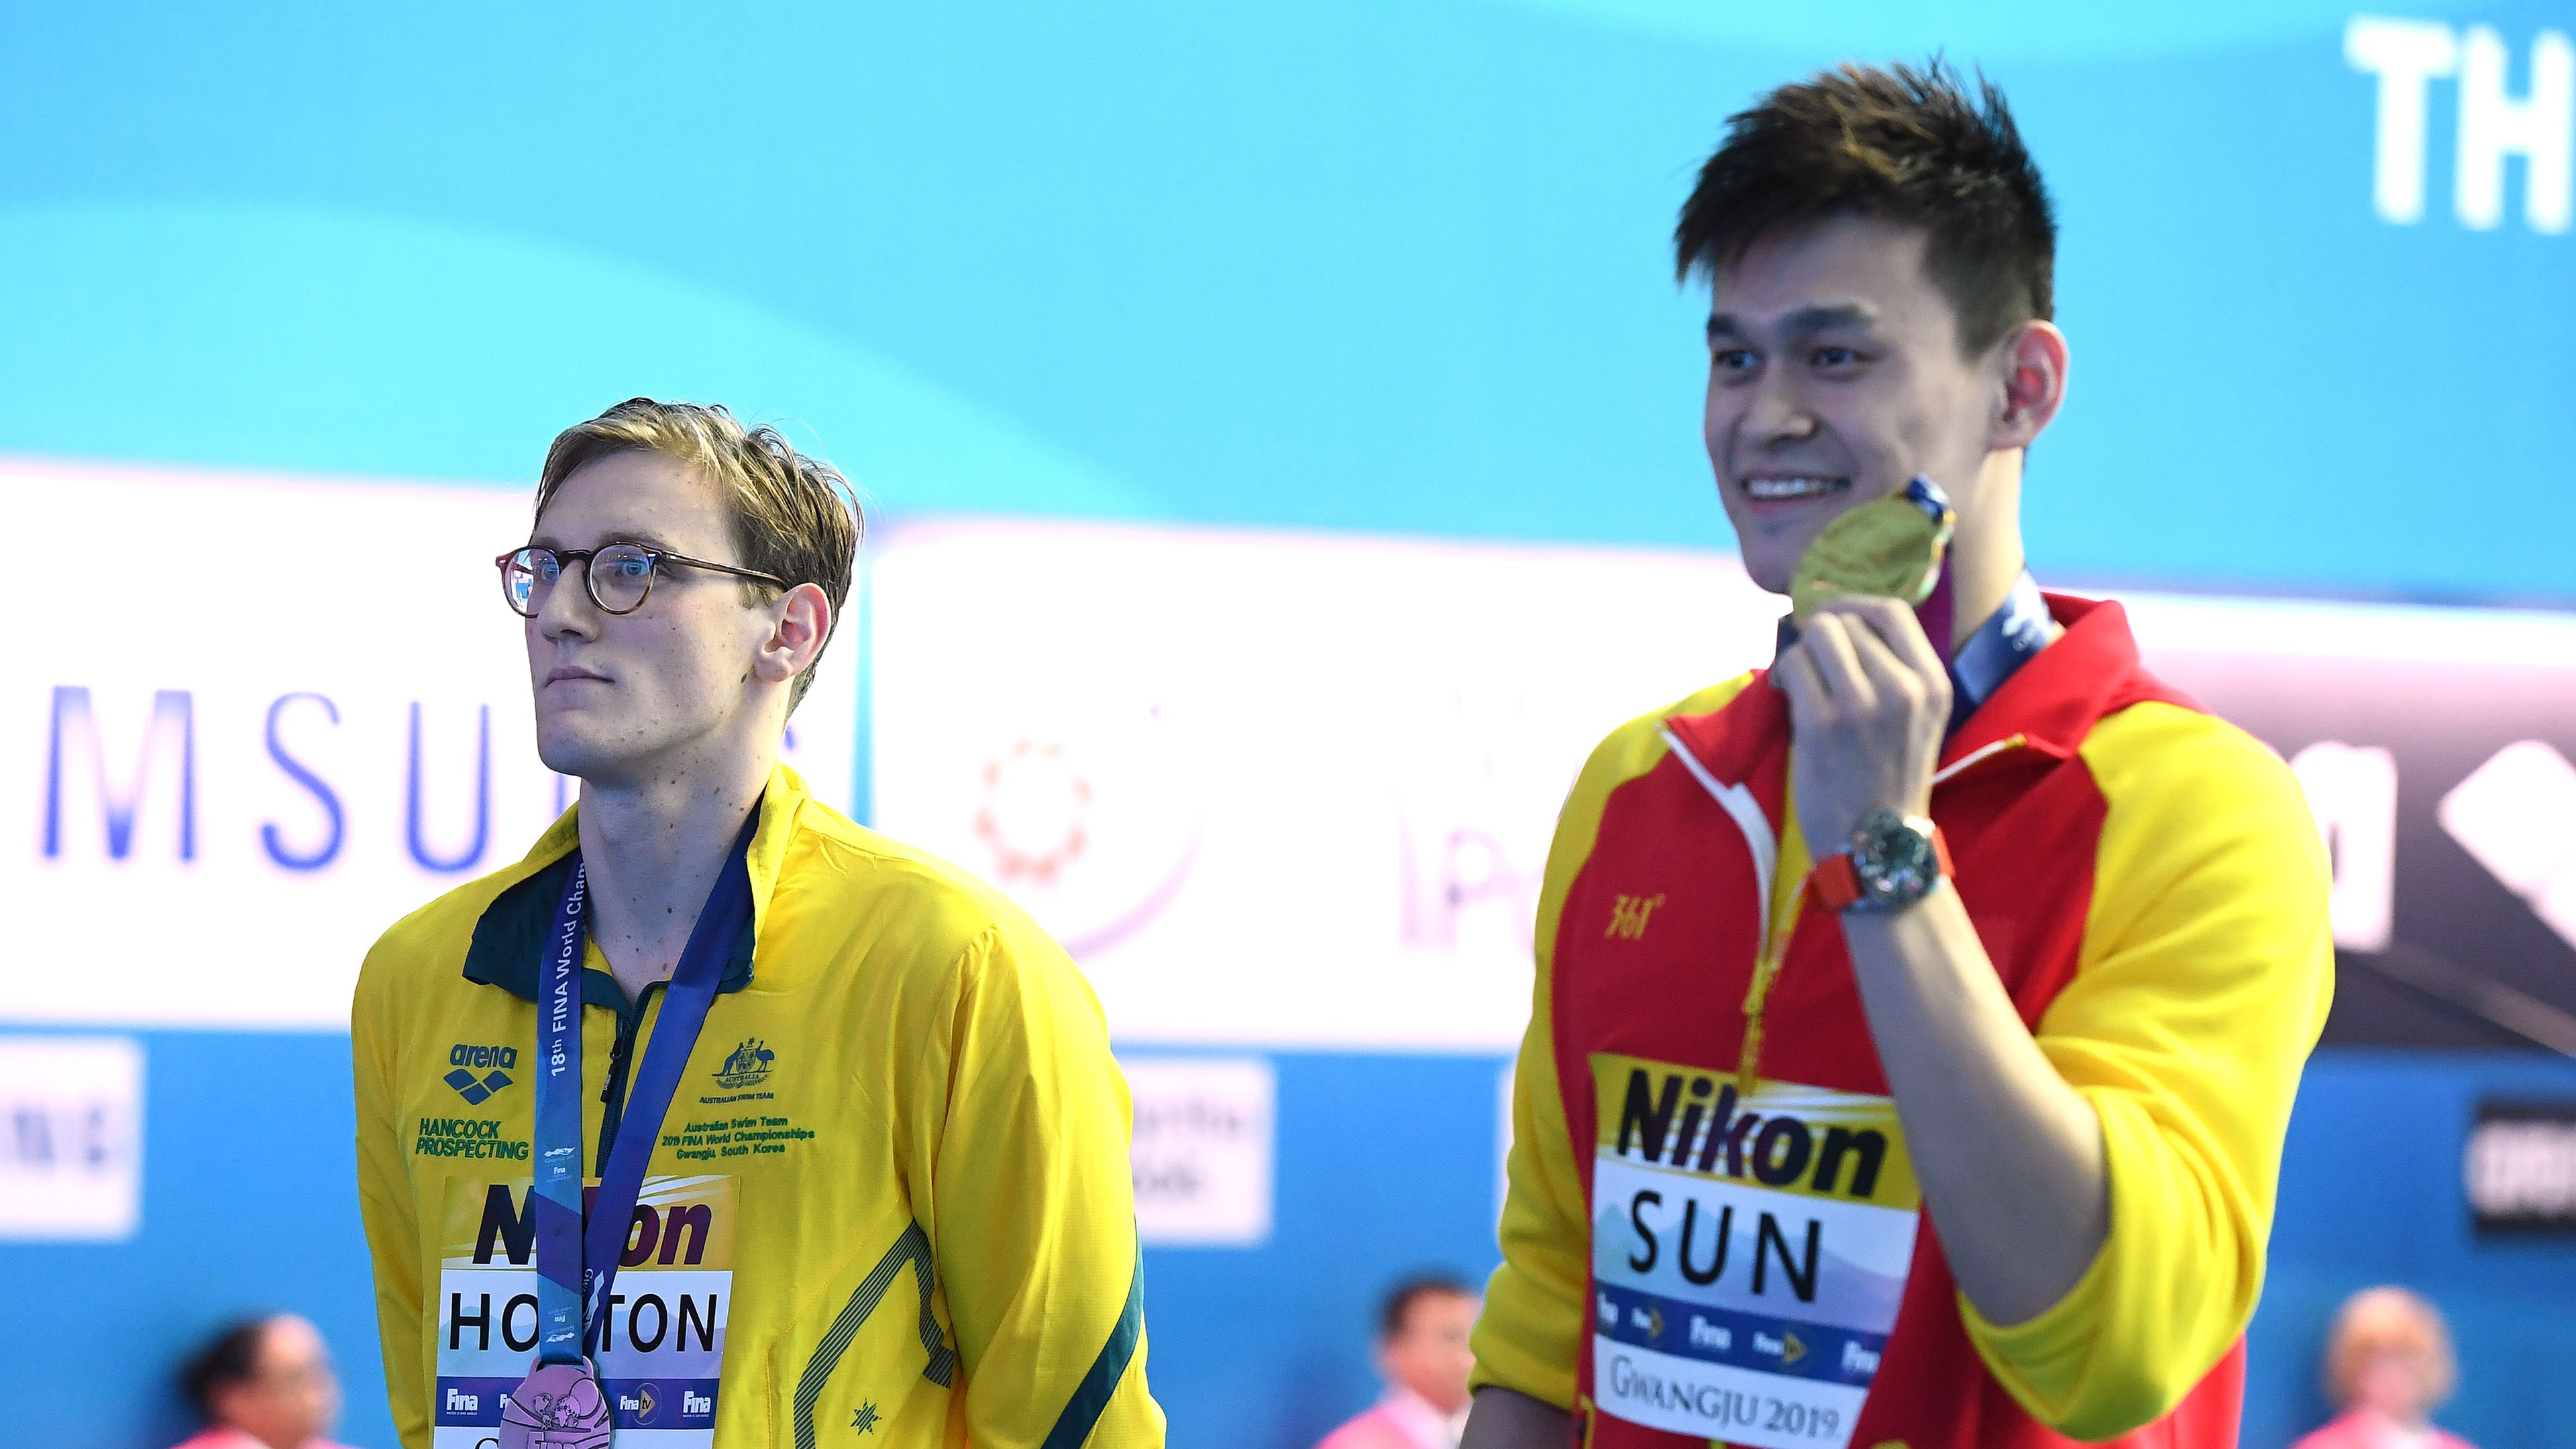 Silver medalist Mack Horton of Australia and gold medalist Sun Yang of China in 2019.